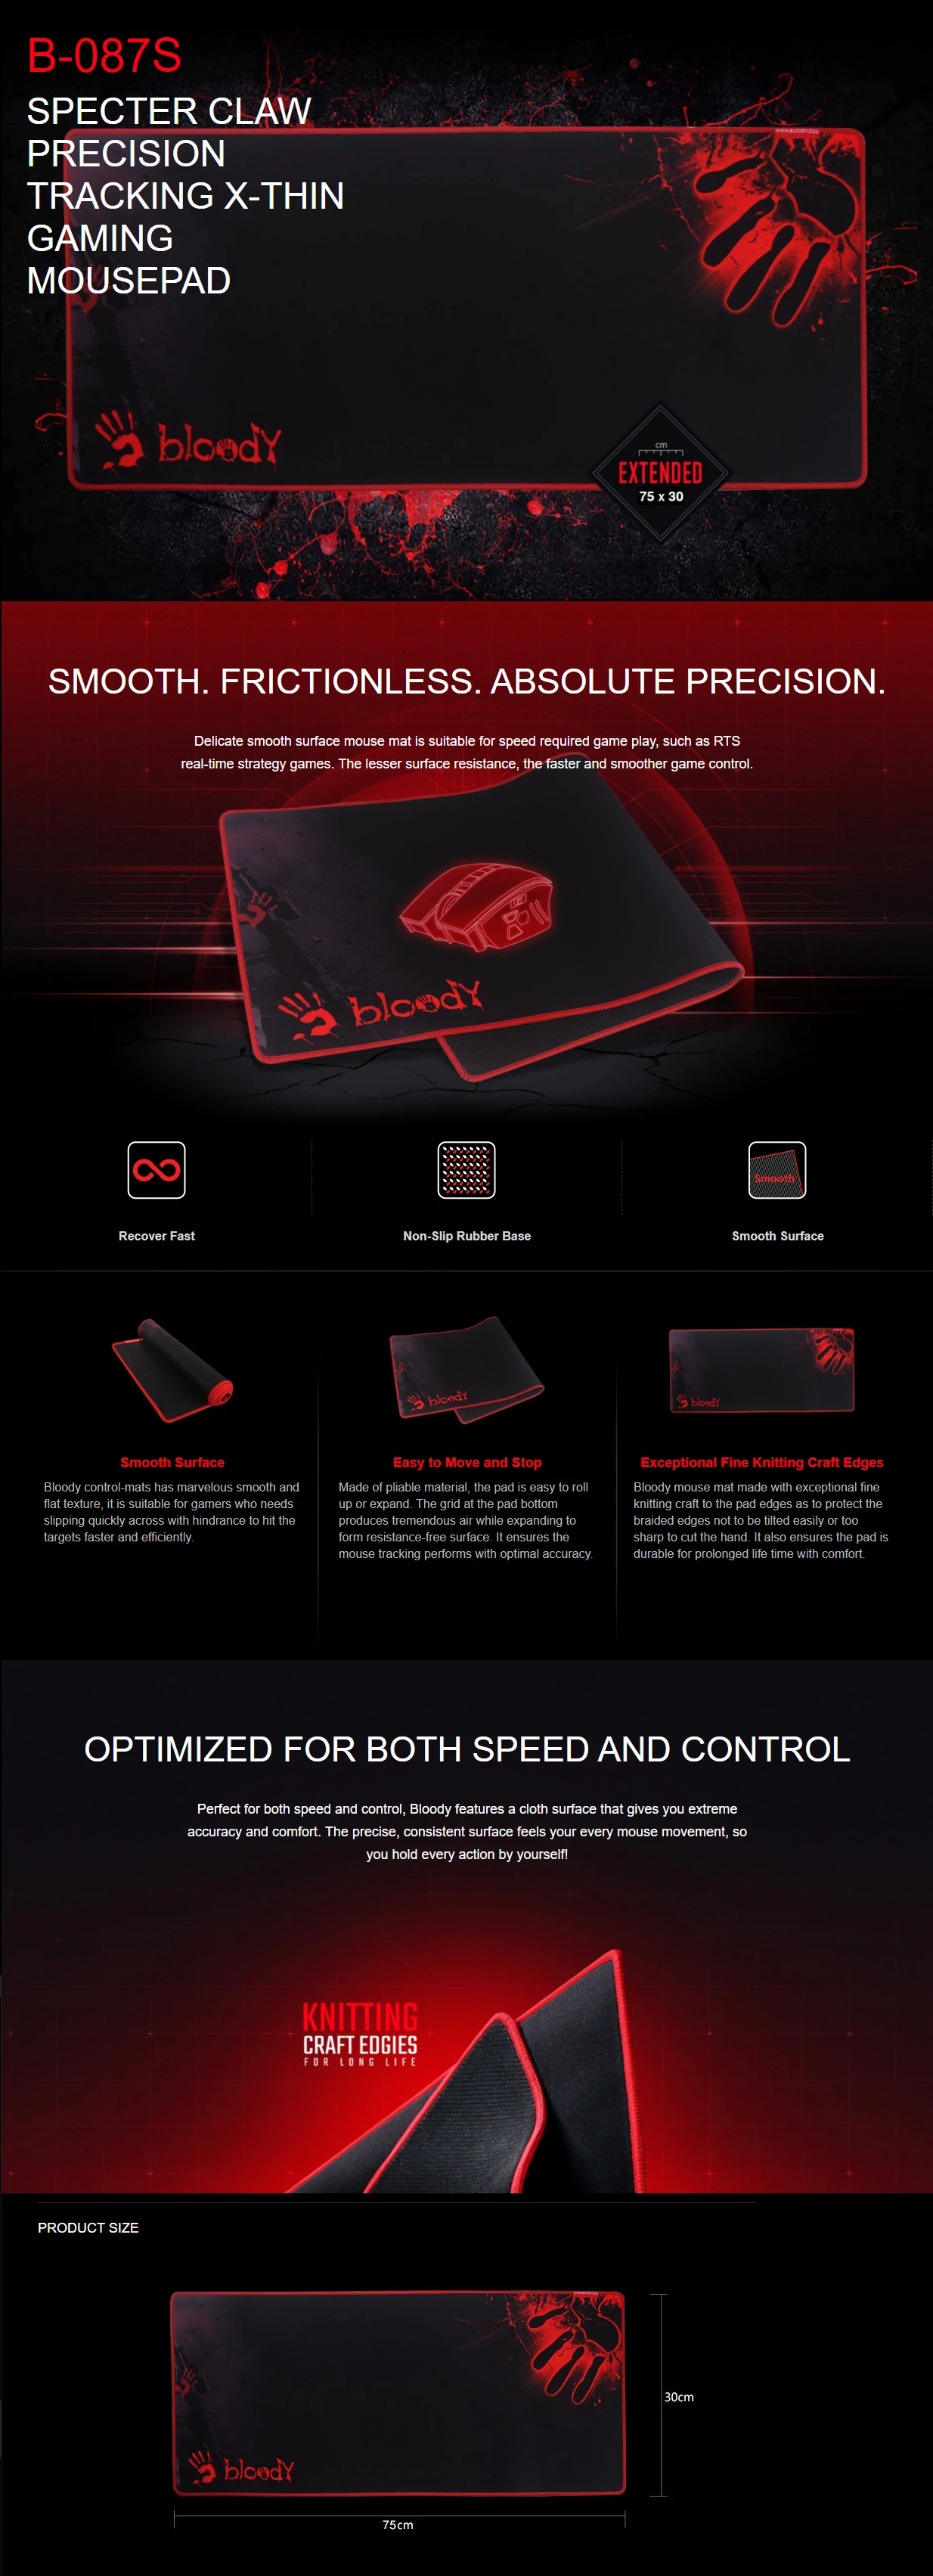 Overview - Bloody - B-087S Specter Claw Precision Tracking X-Thin Gaming Mouse Pad